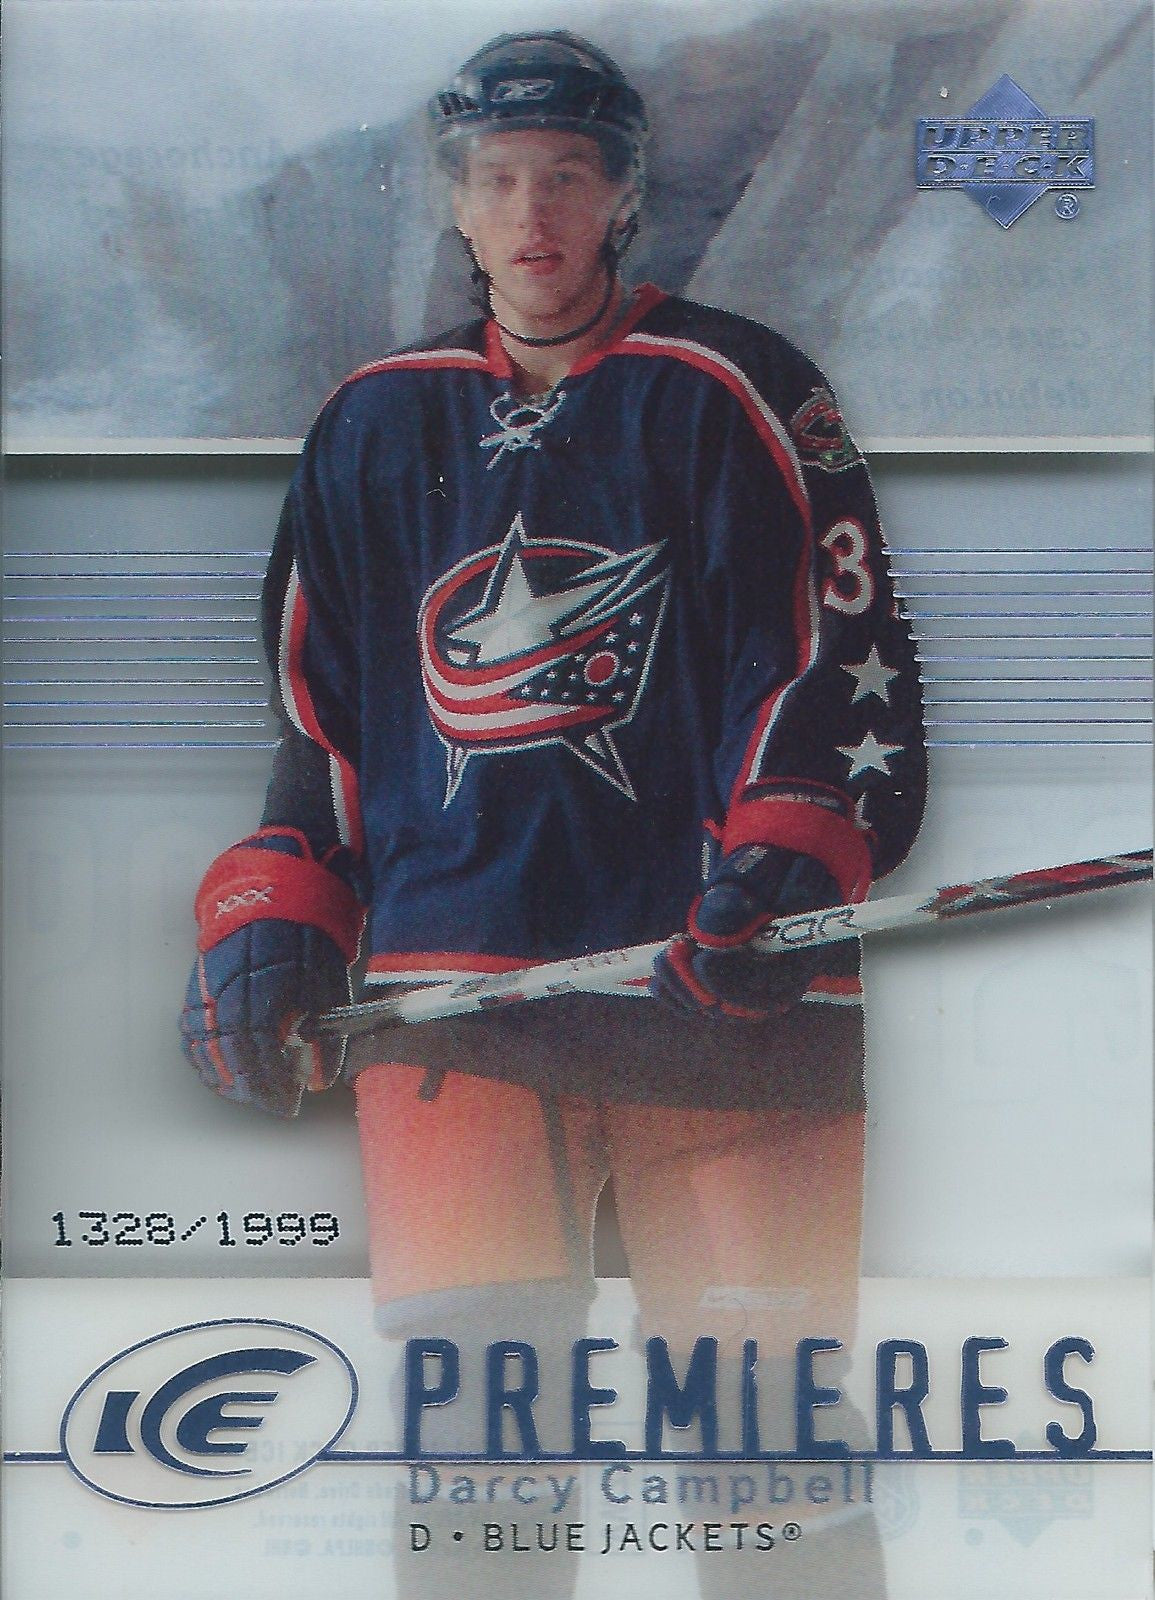 2007-08 UD Ice DARCY CAMPBELL RC #/1999 Ice Premiers UD Rookie 00953